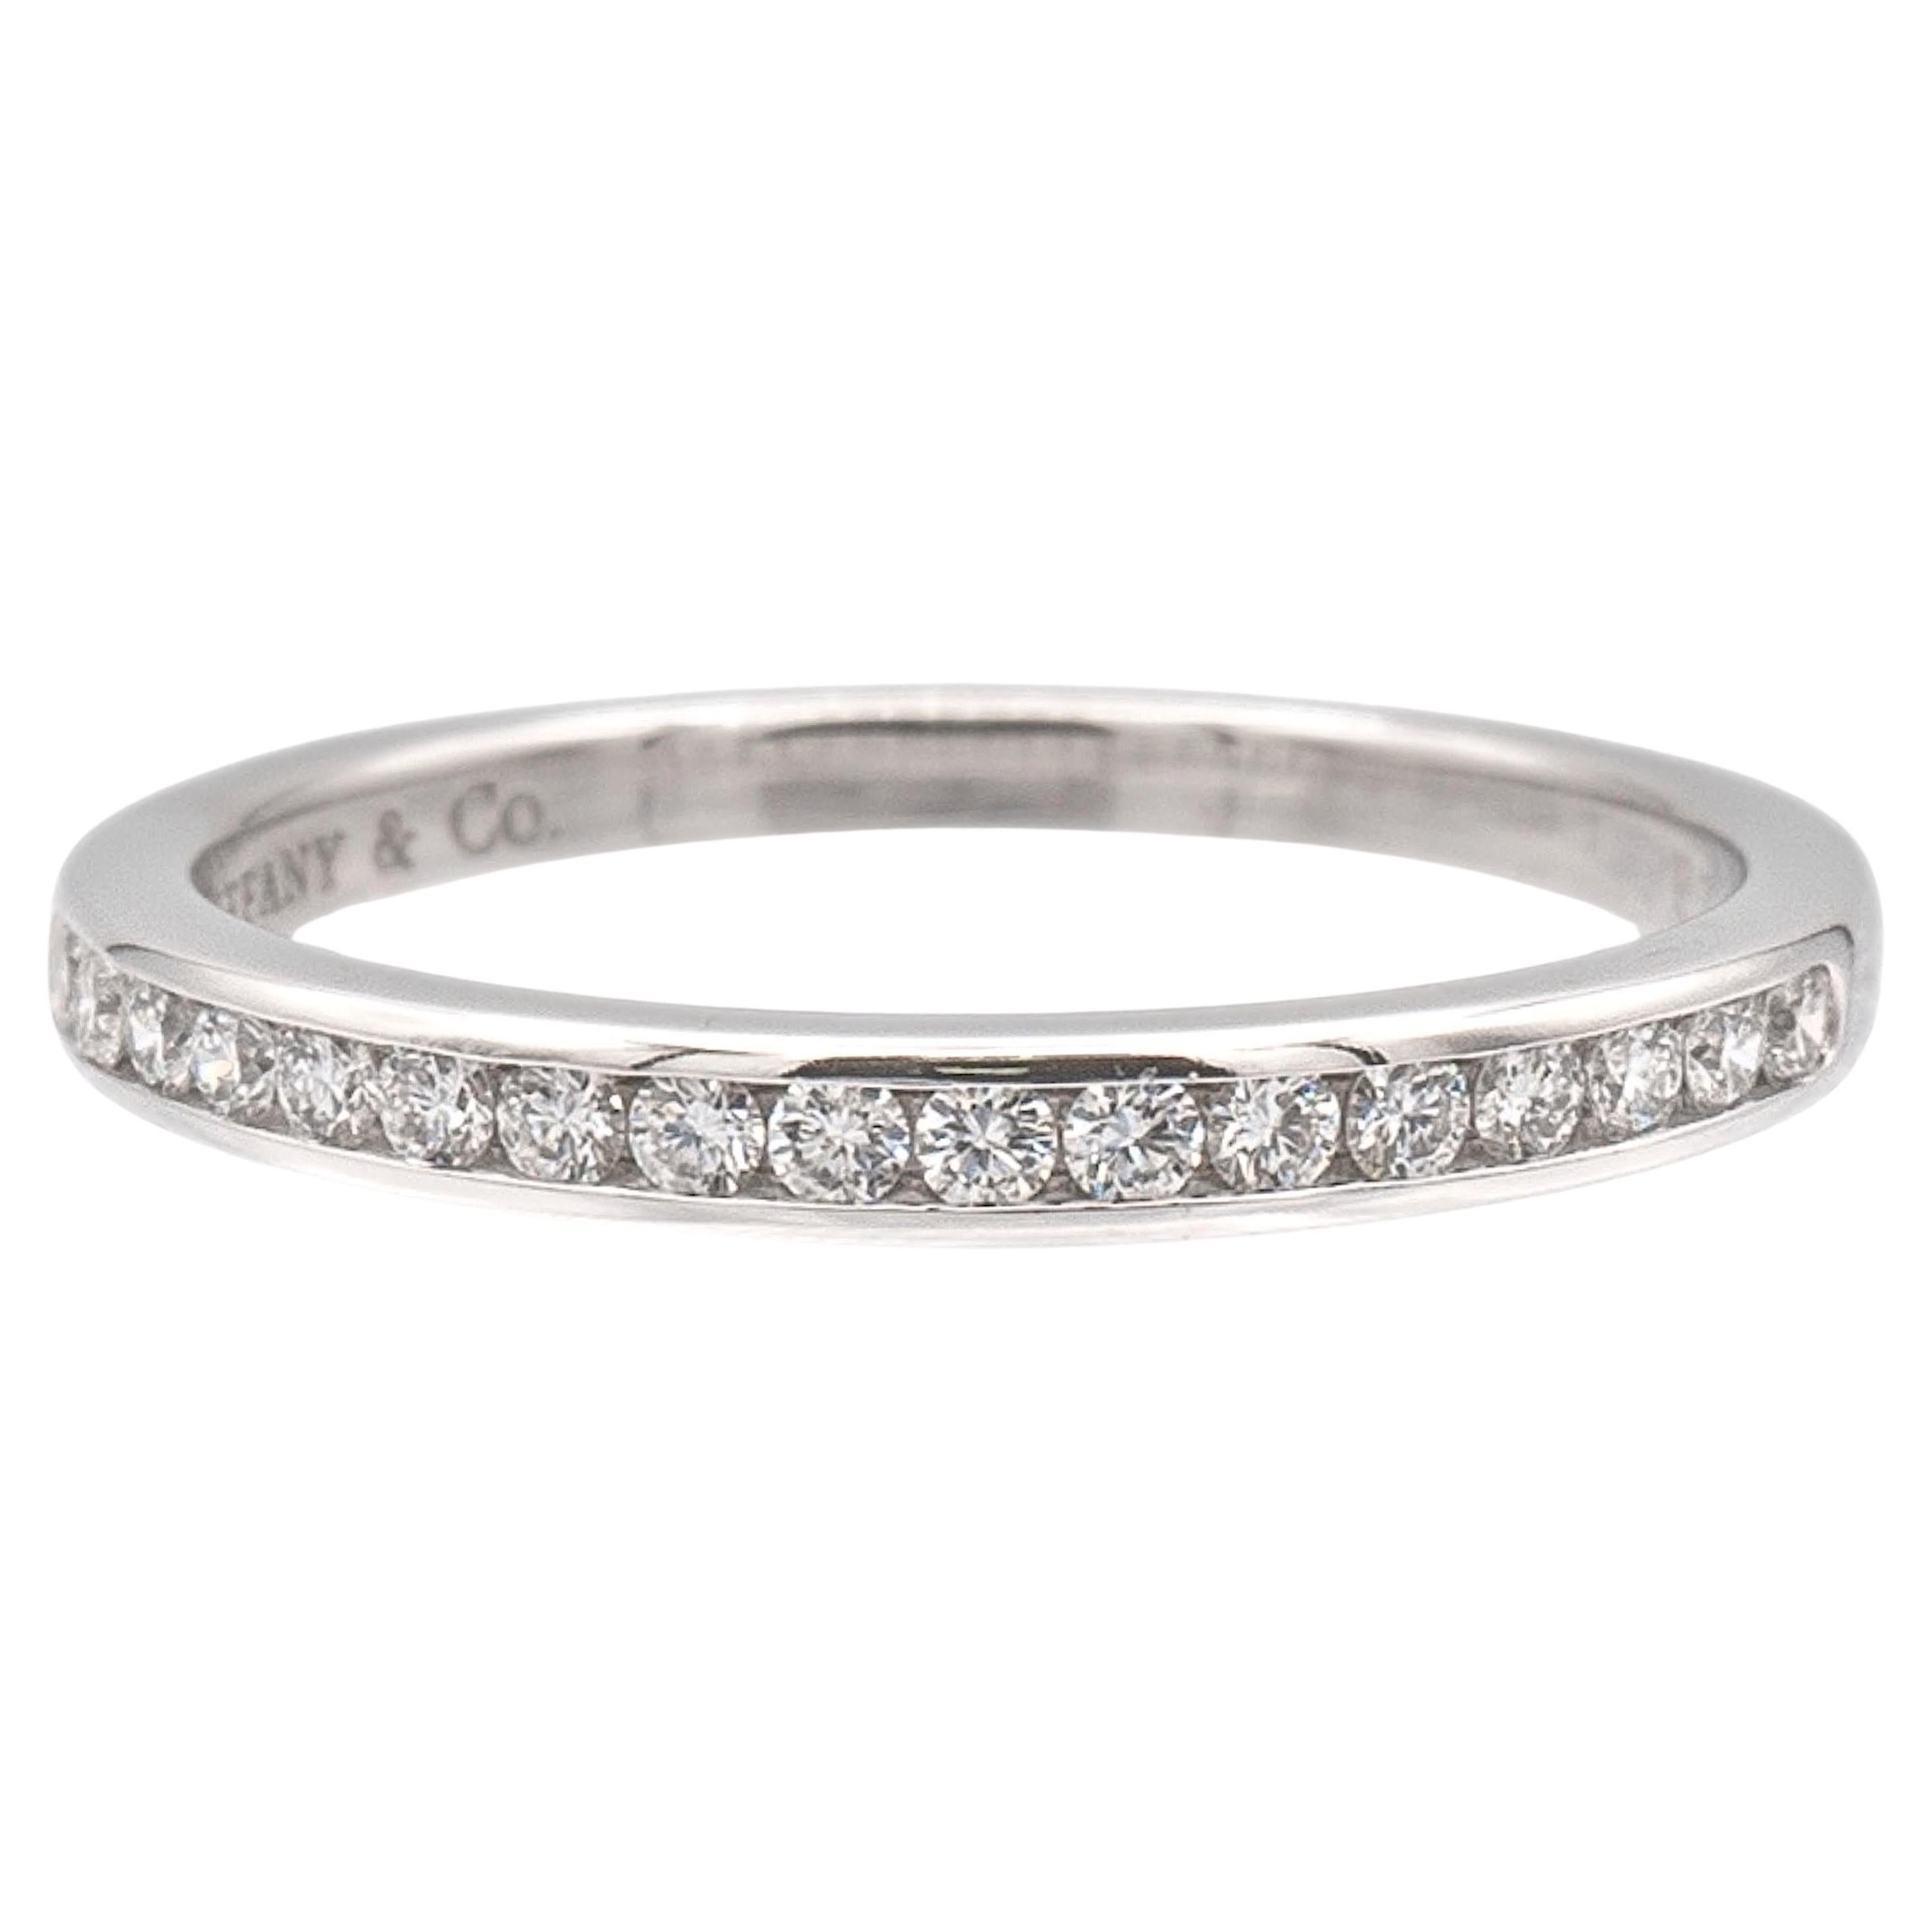 Tiffany & Co. half-circle wedding band ring from the Tiffany setting collection finely crafted in platinum featuring 15 round brilliant cut diamonds weighing 0.24 carats ranging D-G color, IF- VS2 clarity, measuring at 2 mm wide, Can be worn on its